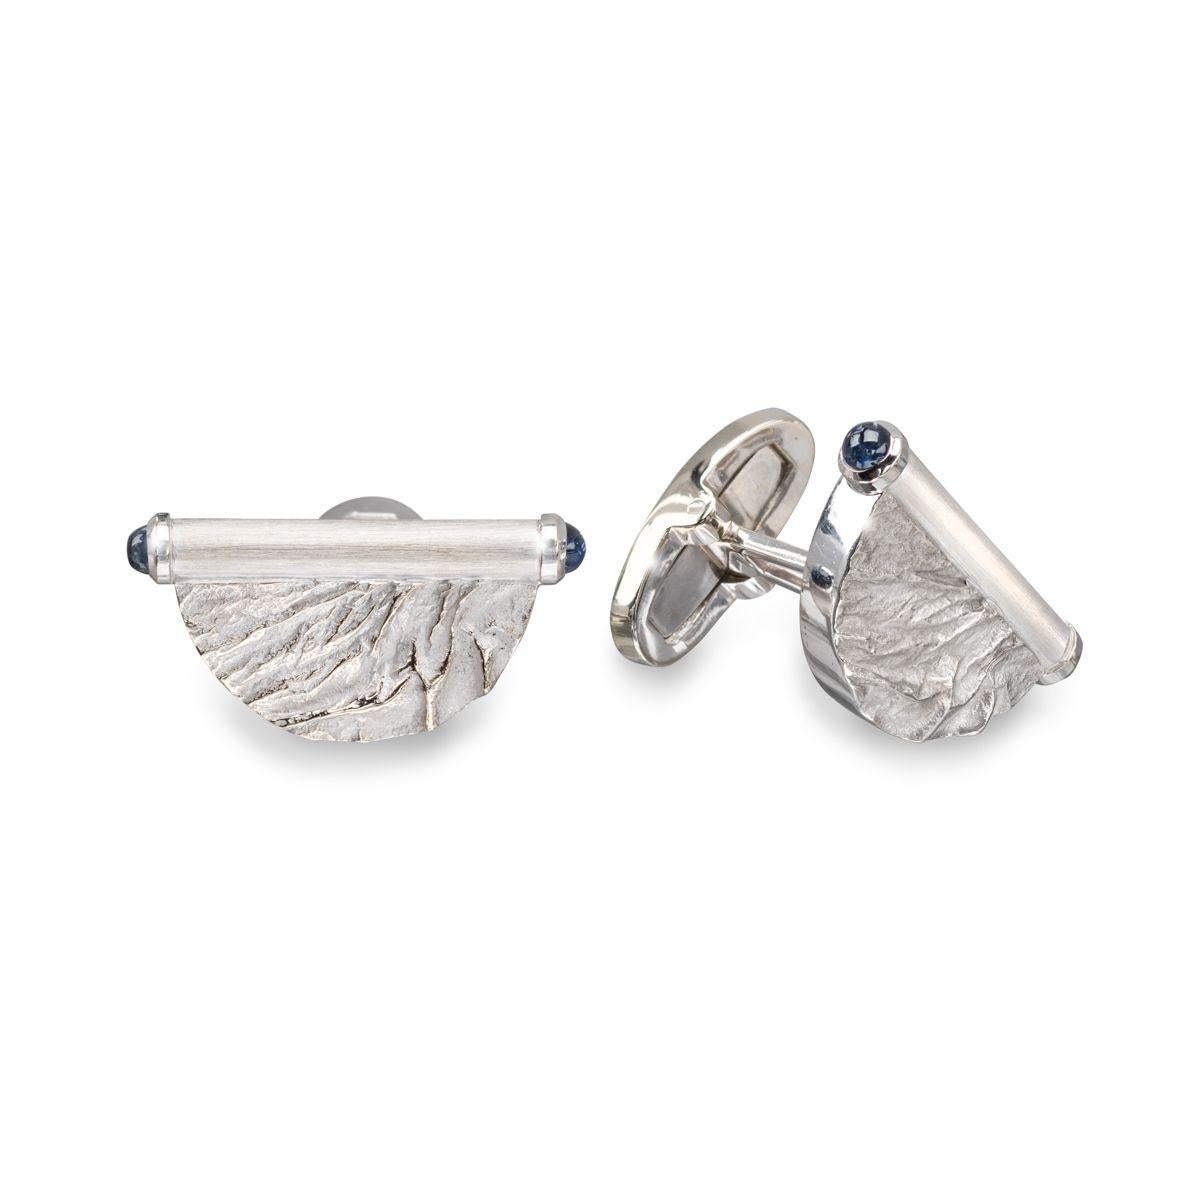 These 18k white gold cufflinks, adorned with blue sapphires, invoke the cool, crisp image of serene mountain landscapes on the reticulated half disc link. Dare to be bold and stand out from the crowd.

